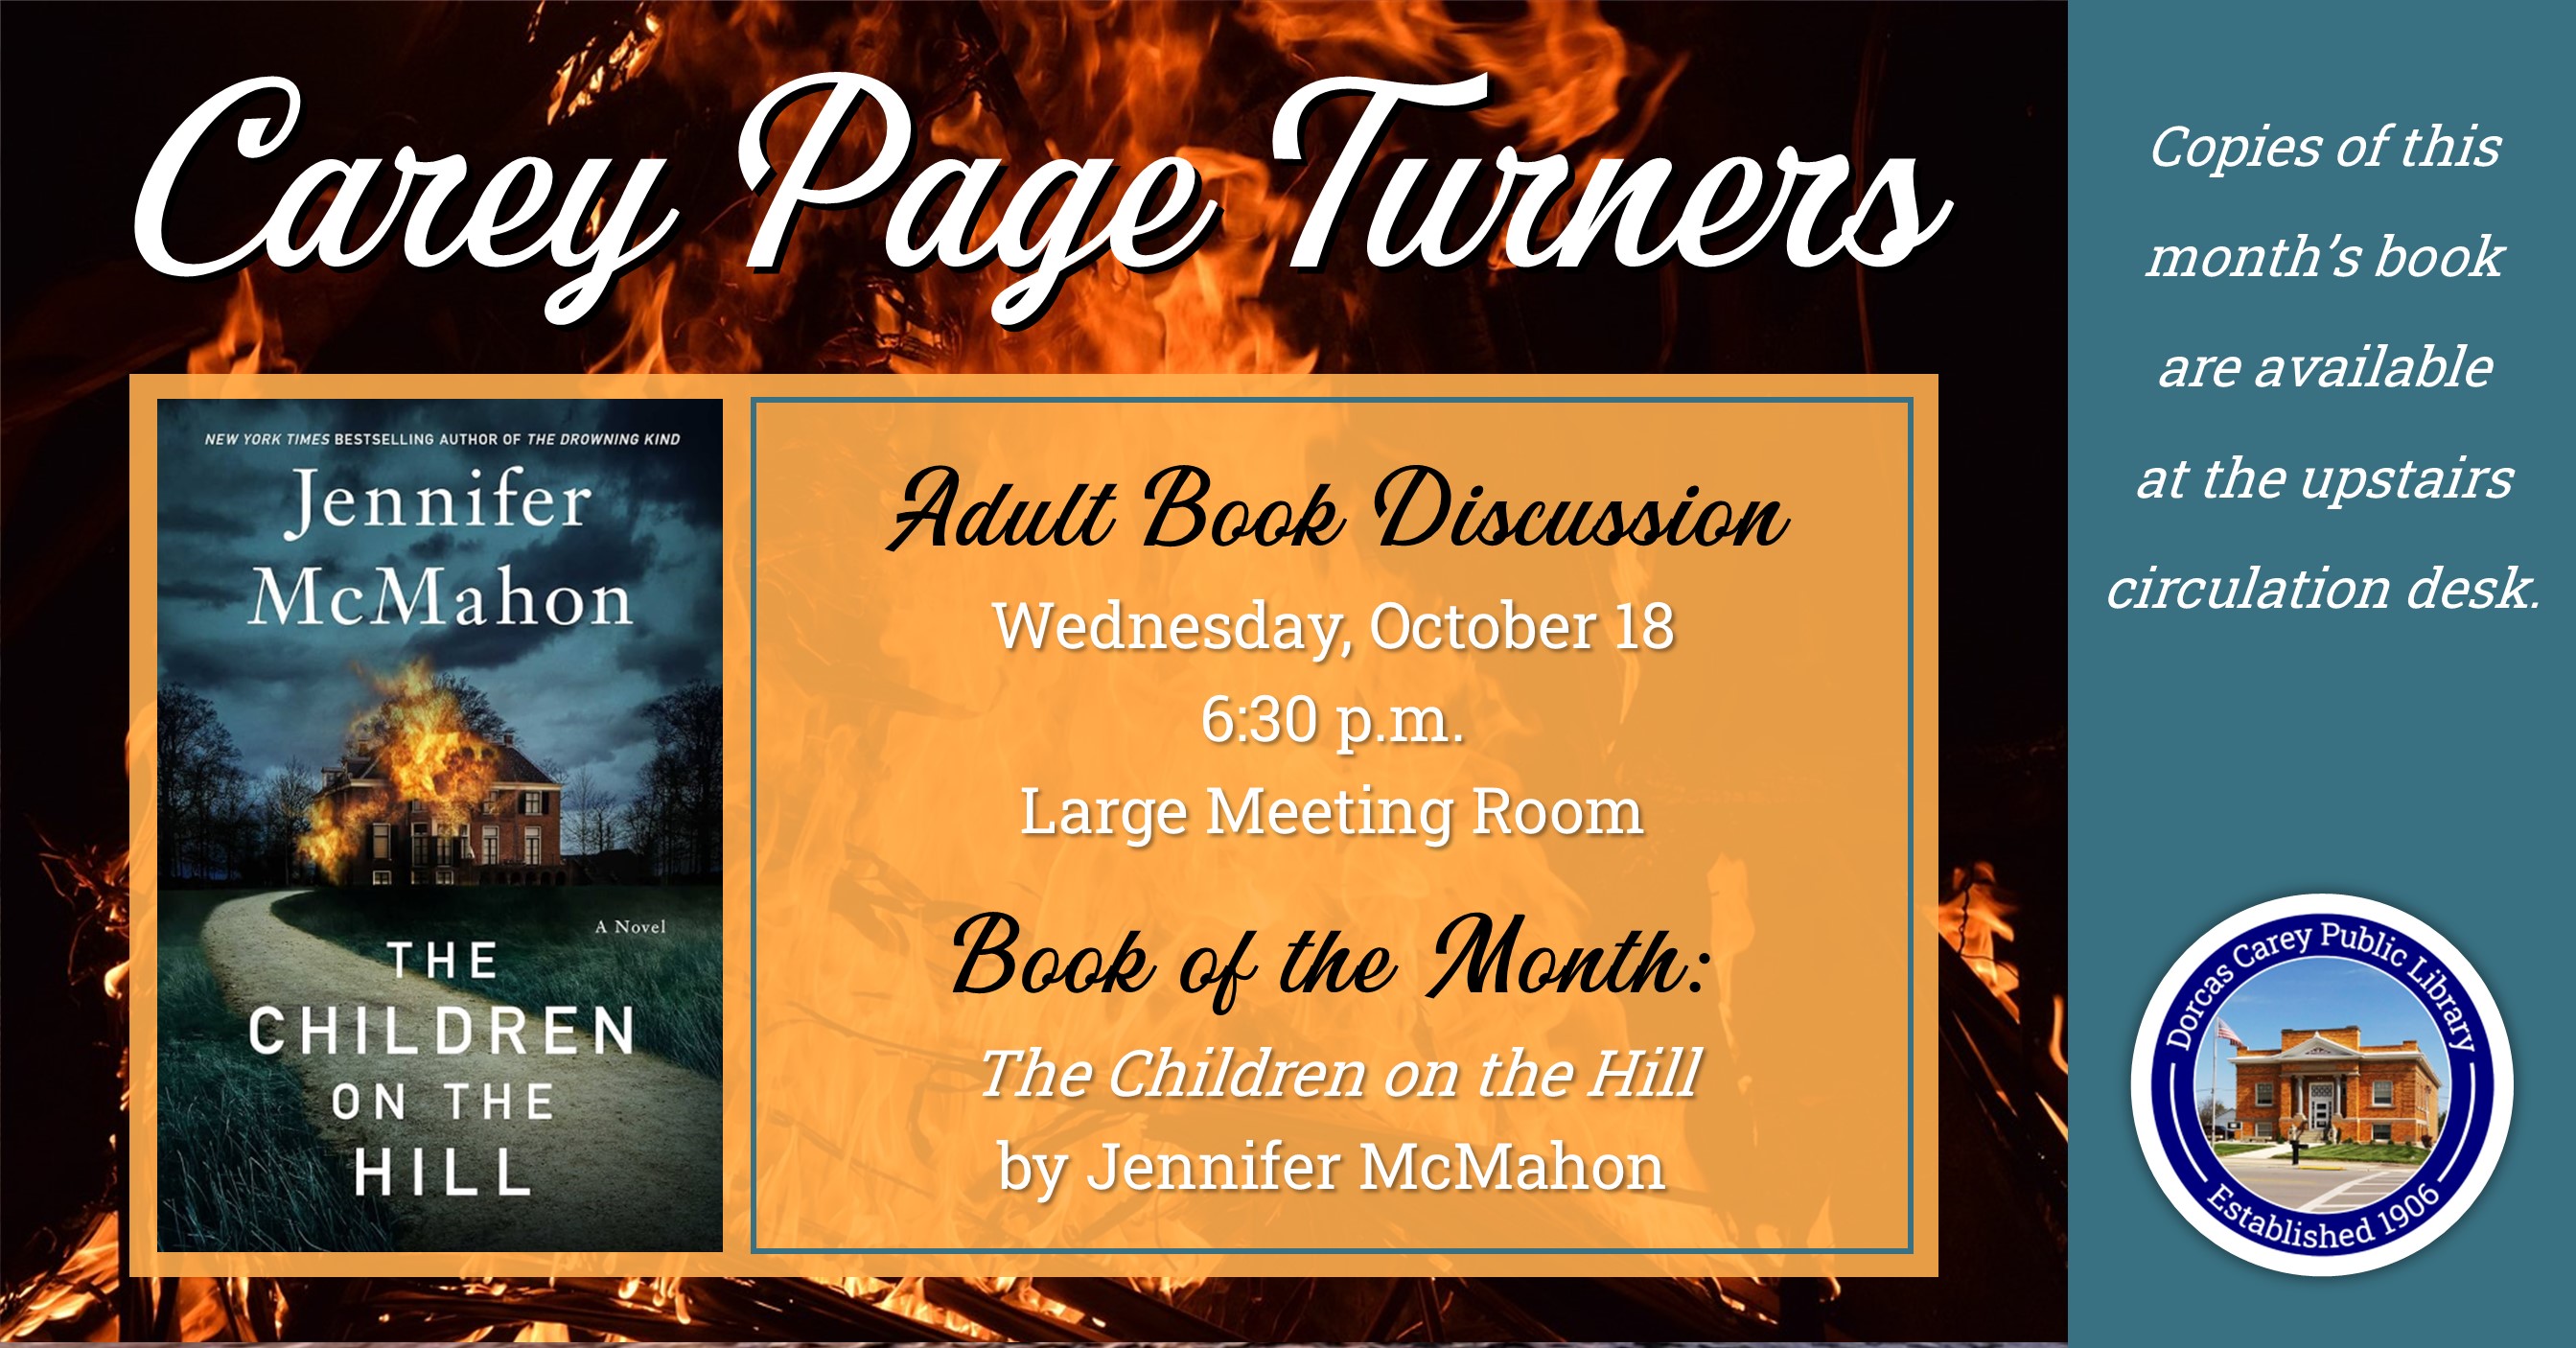 The Carey Page Turners will meet on Wednesday, October 18th at 6:30 p.m. to discuss the book: The Children on the Hill by Jennifer McMahon.  The year 1978: At her renowned treatment center in picturesque Vermont, the brilliant psychiatrist Dr. Helen Hildreth is acclaimed for her compassionate work with the mentally ill. But when’s she home with her cherished grandchildren, Vi and Eric, she’s just Gran—teaching them how to take care of their pets, preparing them home-cooked meals, providing them with care an